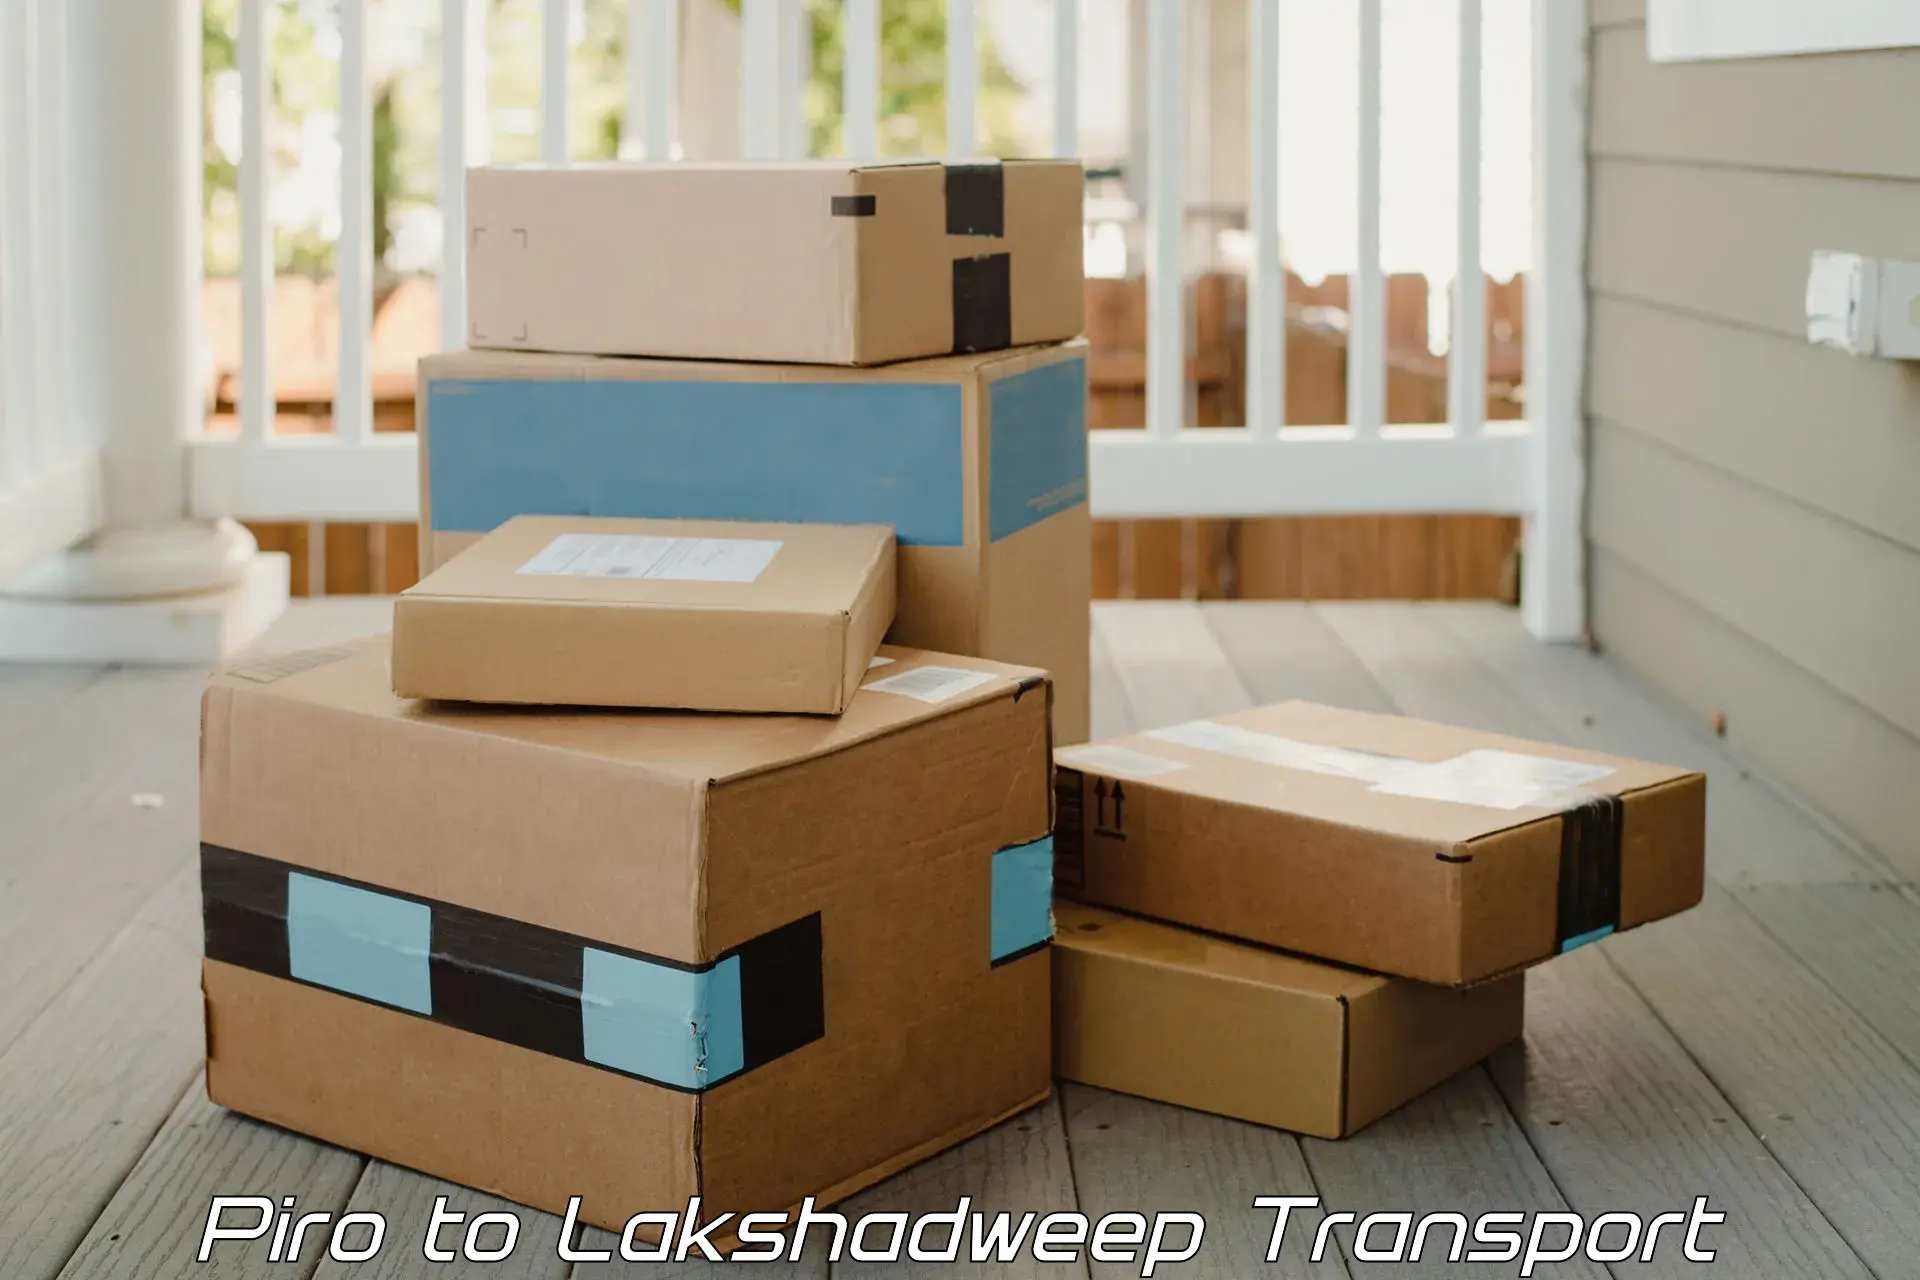 Goods transport services Piro to Lakshadweep